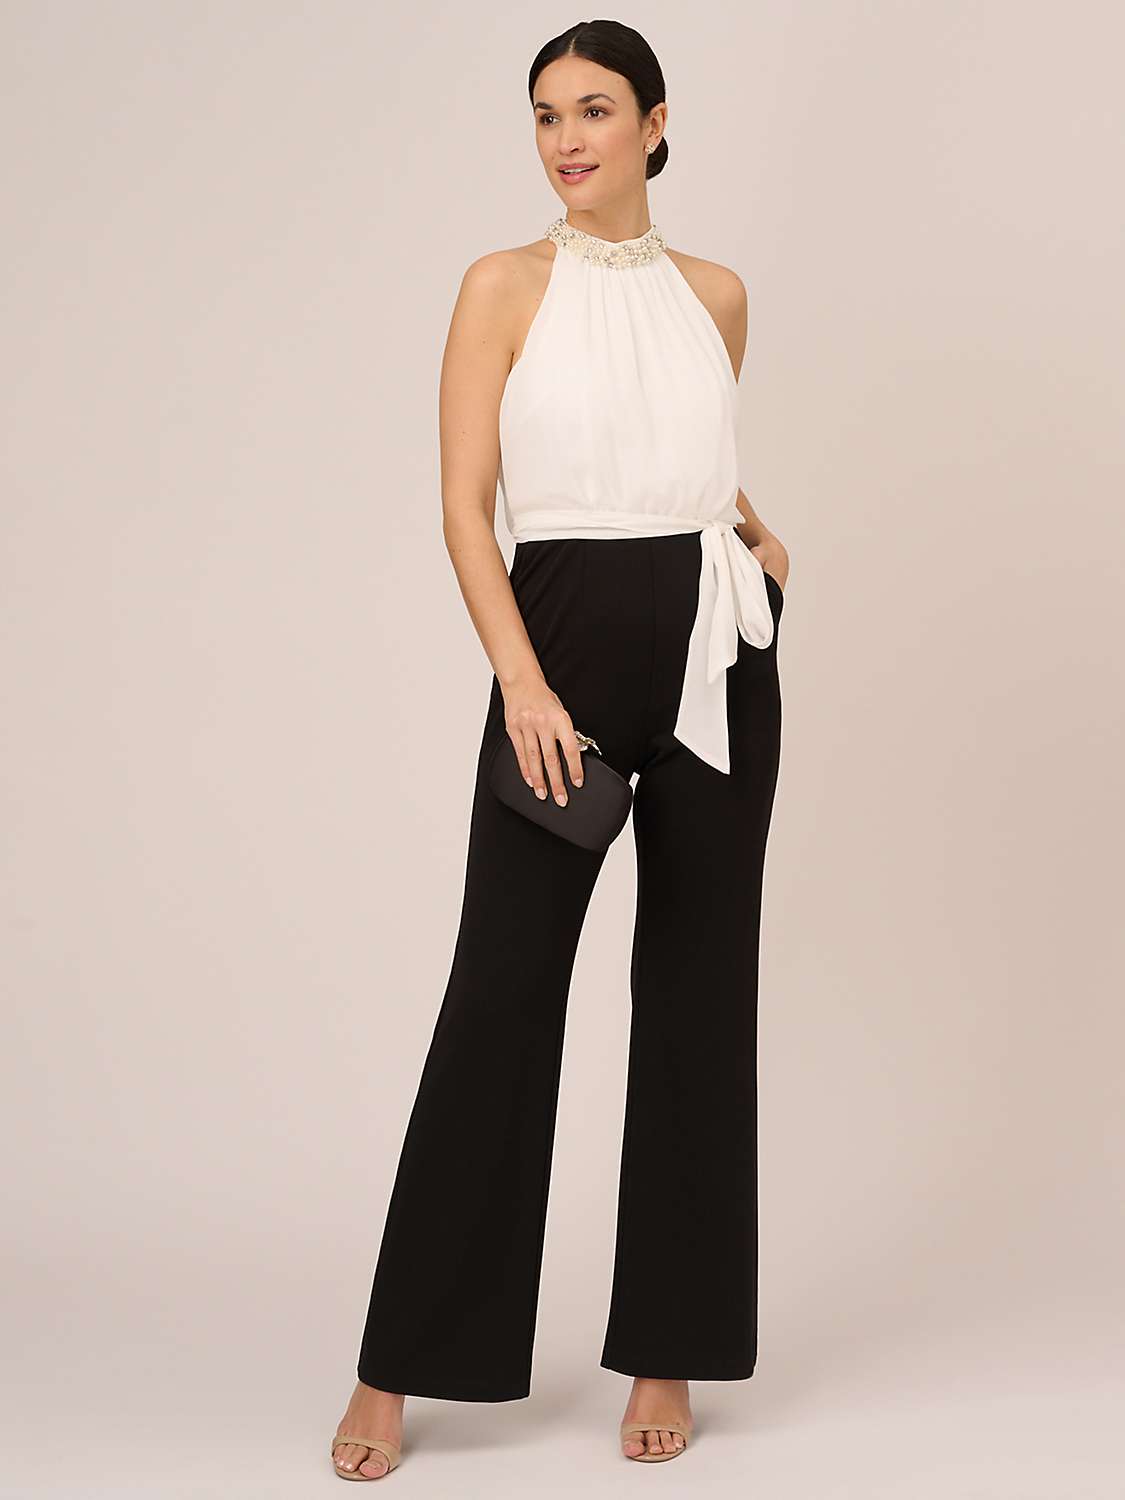 Buy Adrianna Papell Faux Pearl Chiffon Crepe Jumpsuit, Ivory/Black Online at johnlewis.com